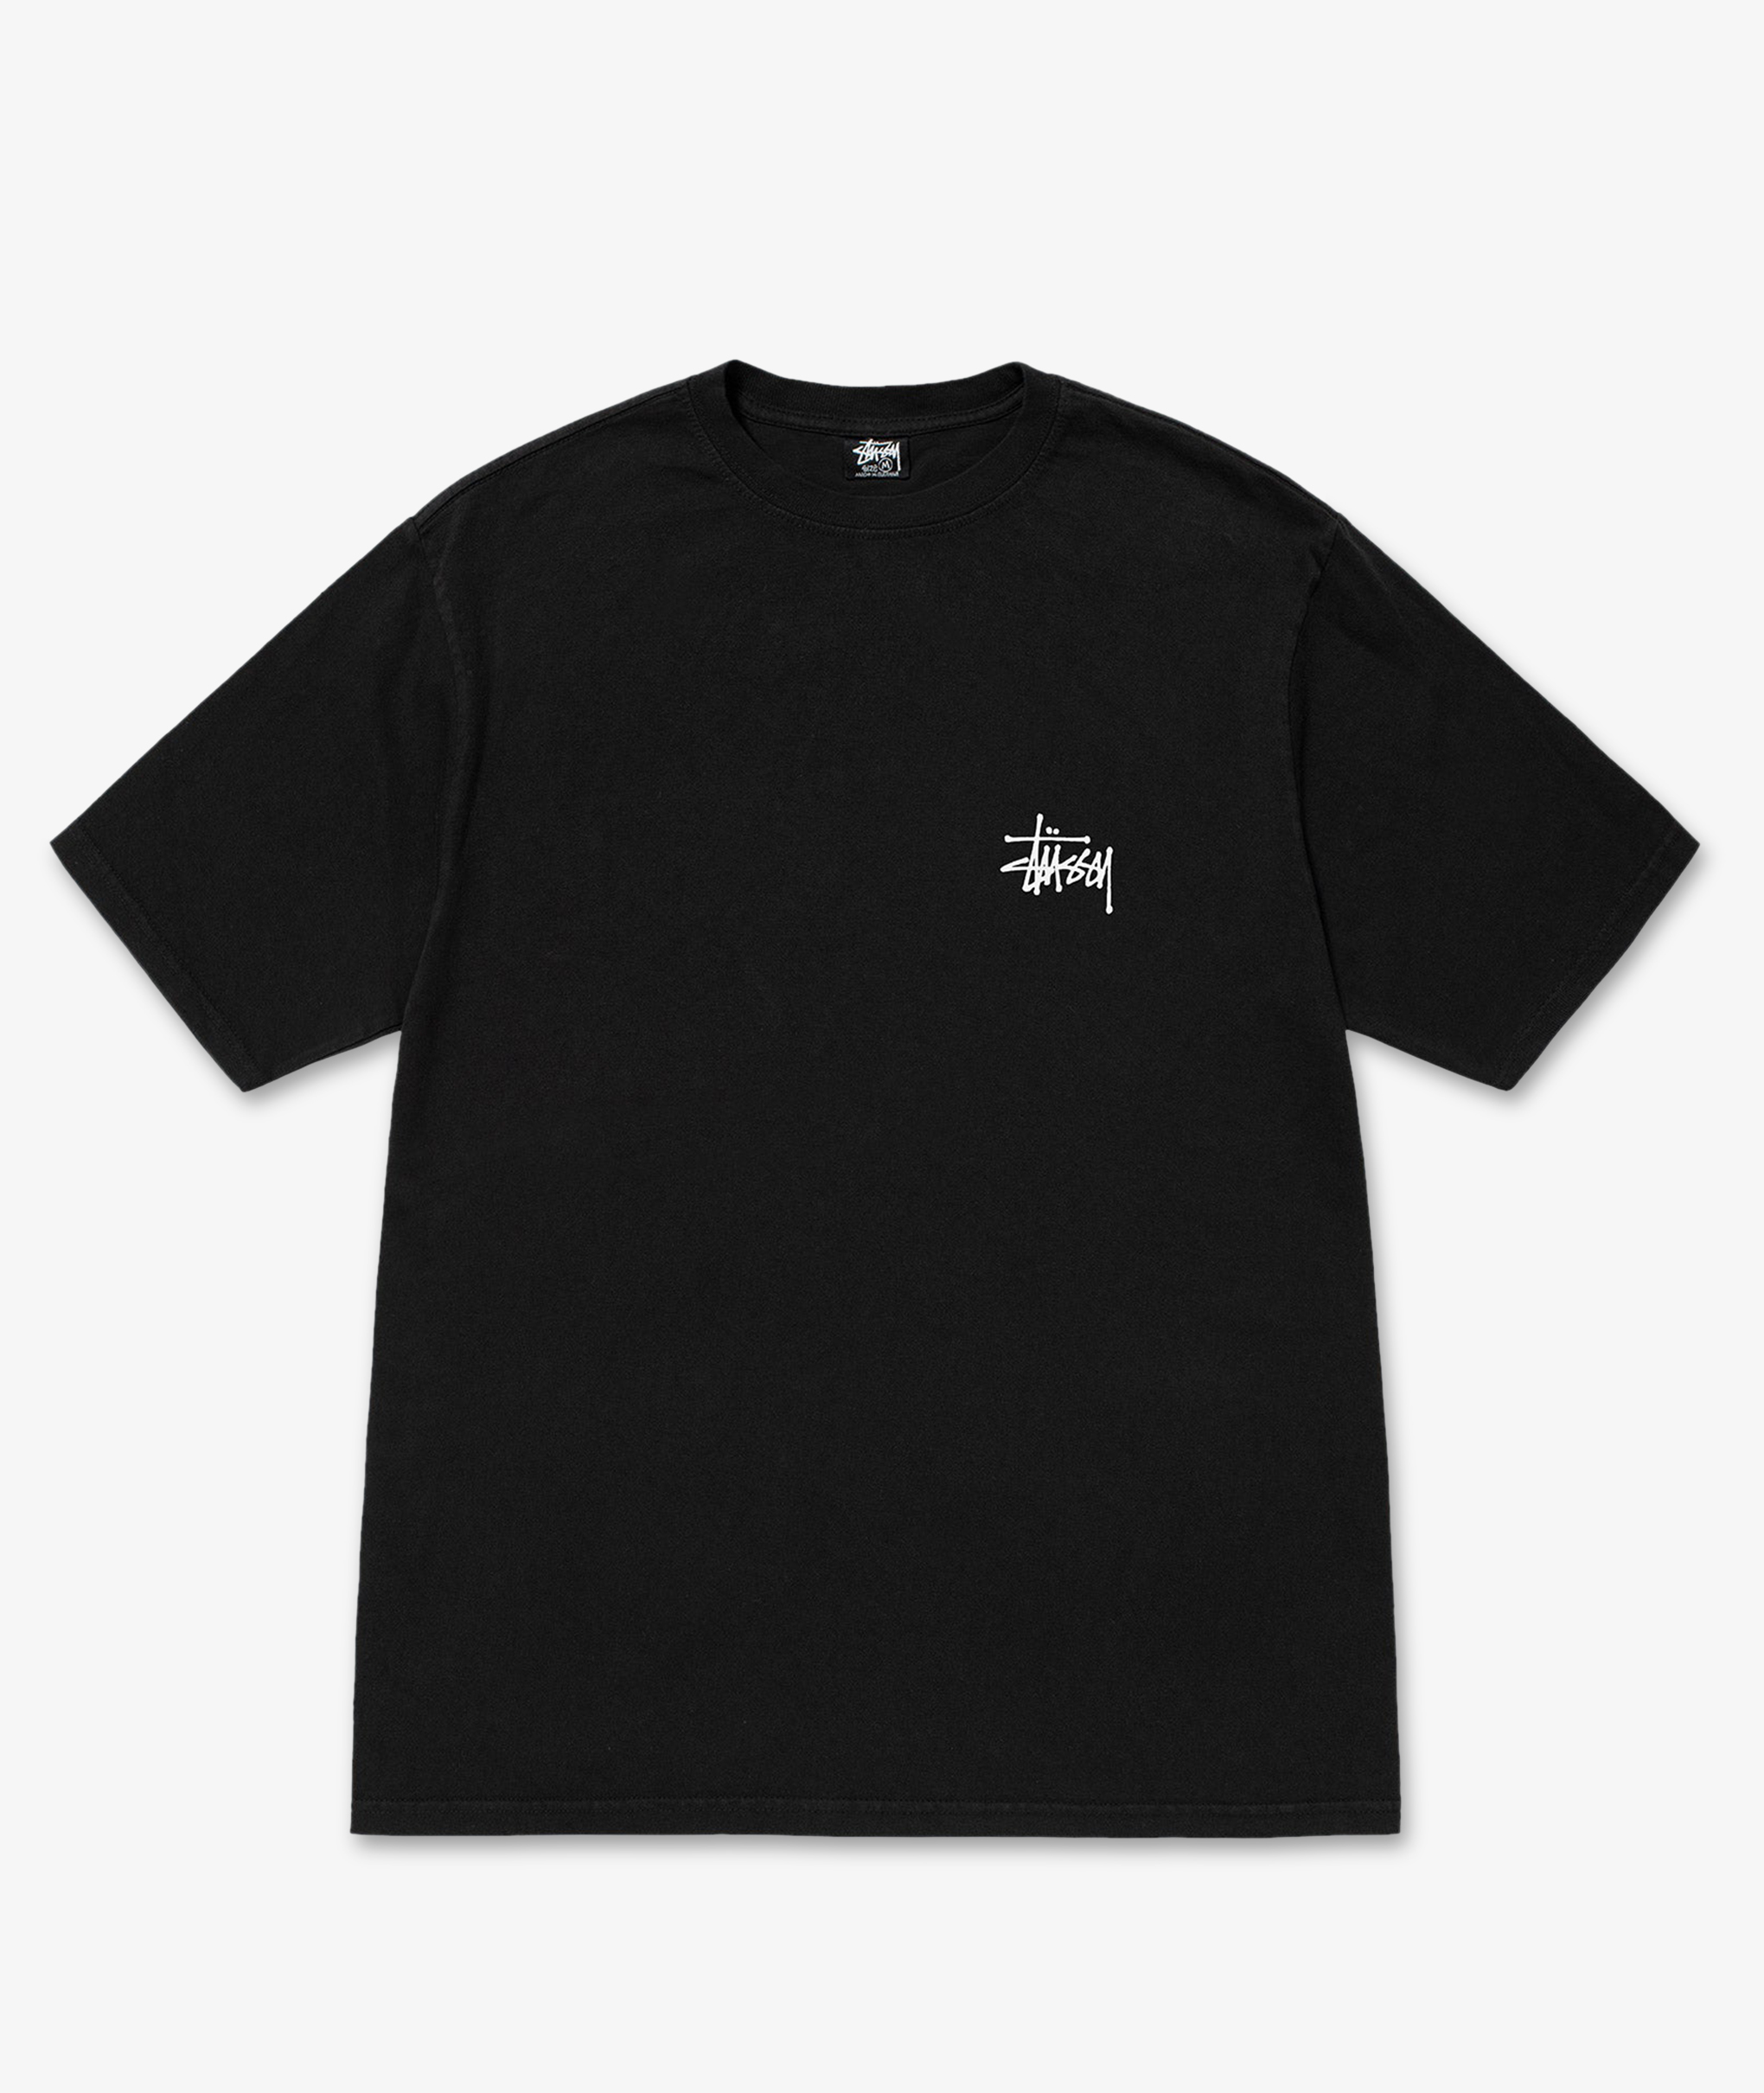 Norse Store | Shipping Worldwide - Stüssy Basic Stussy Pigment Dyed tee ...